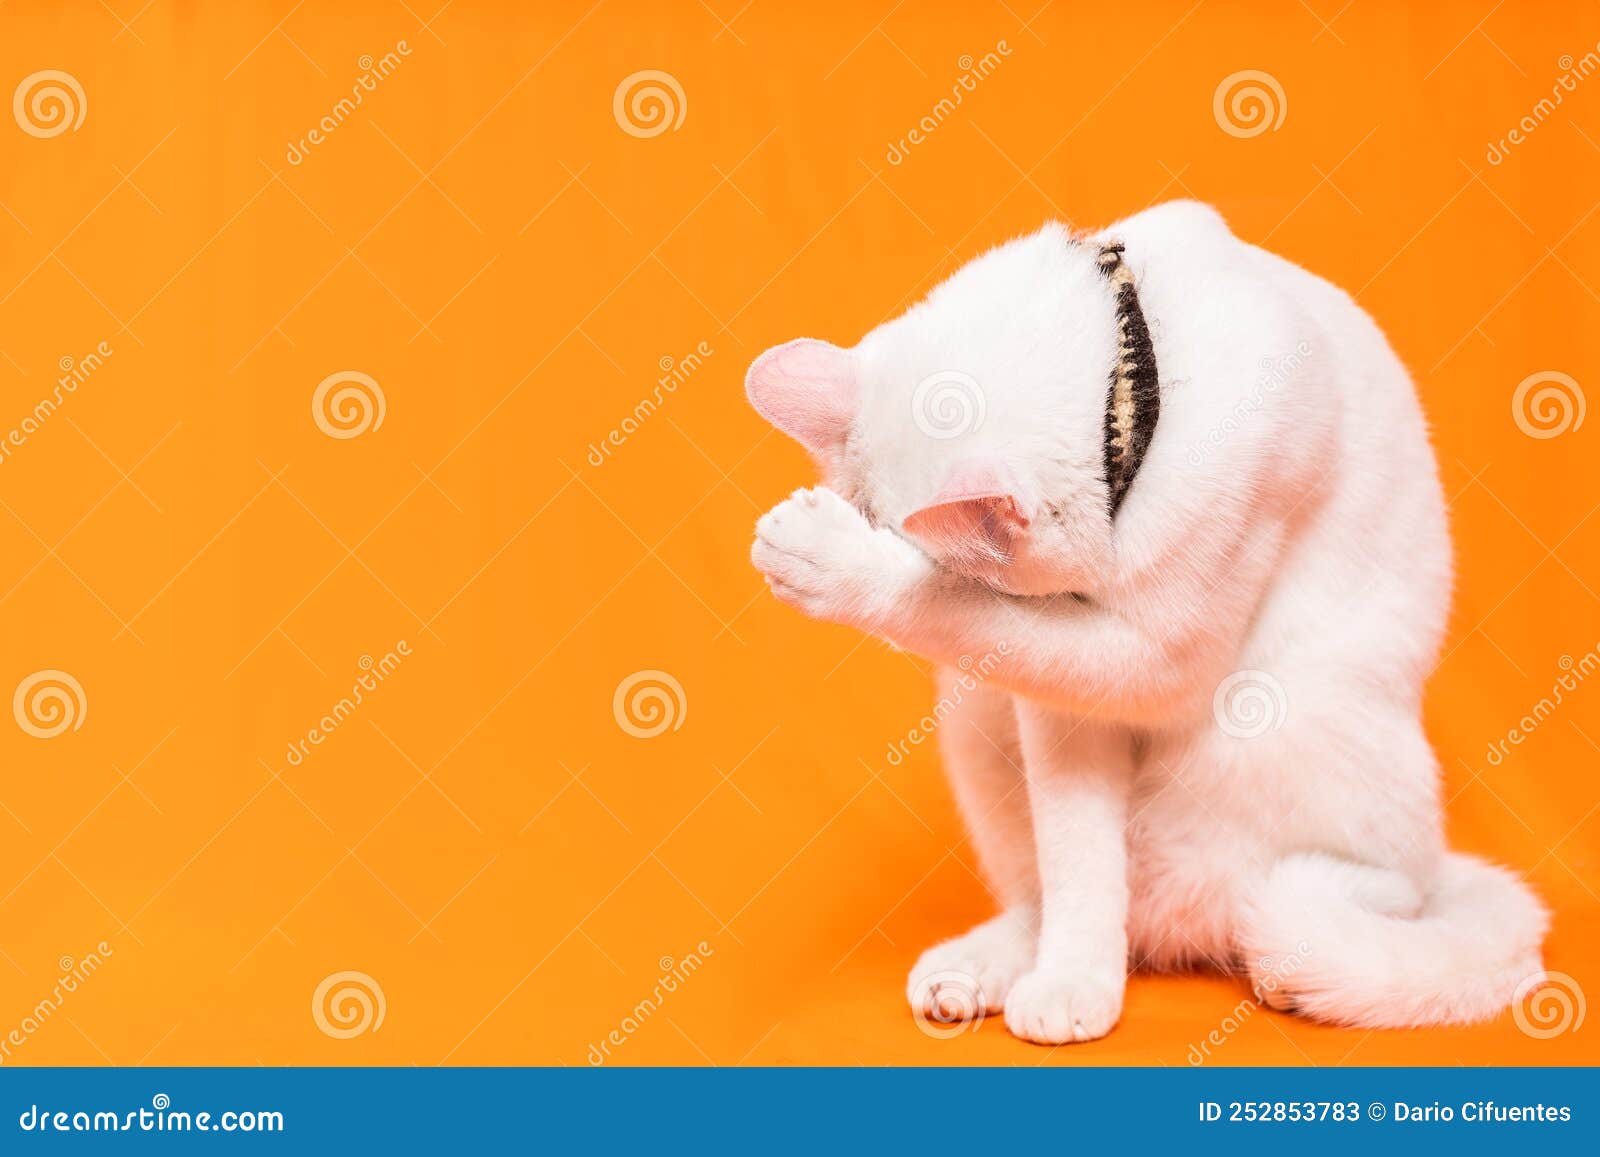 young white cat shyly covers its face, orange background